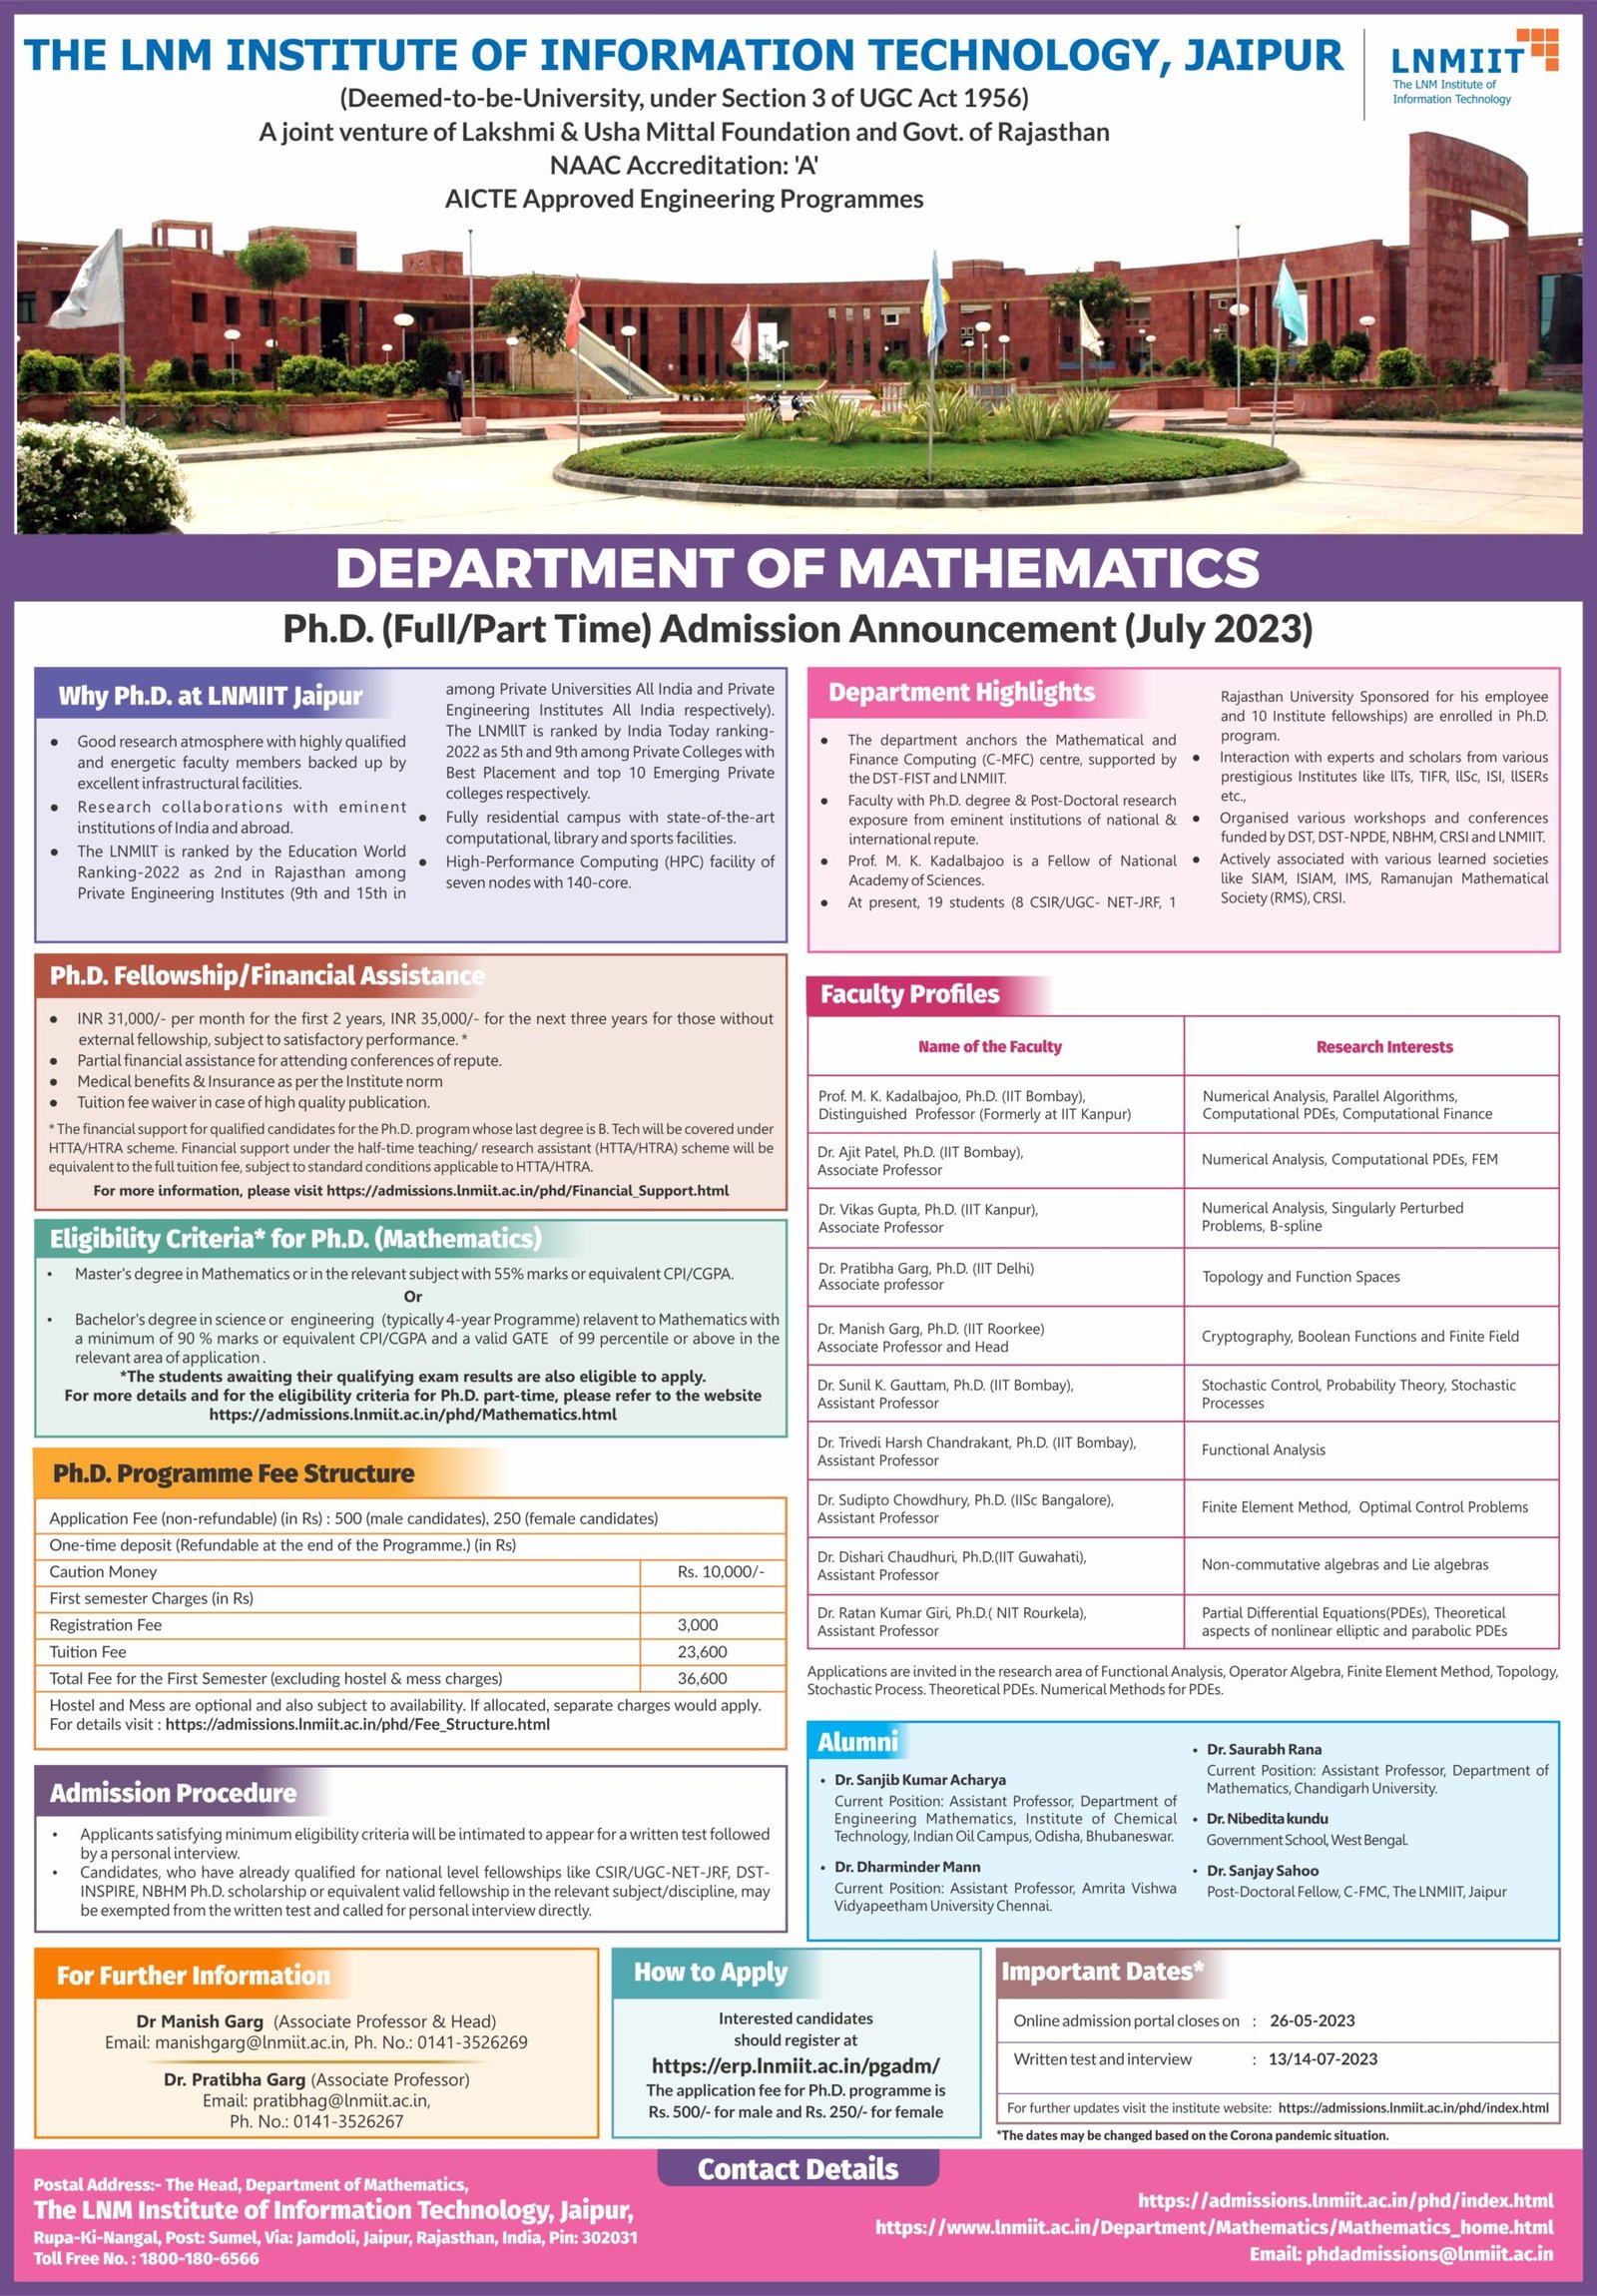 Ph.D. Admission: The LNM Institute of Information Technology Jaipur for July 2023, Application of Deadline: May 16, 2023